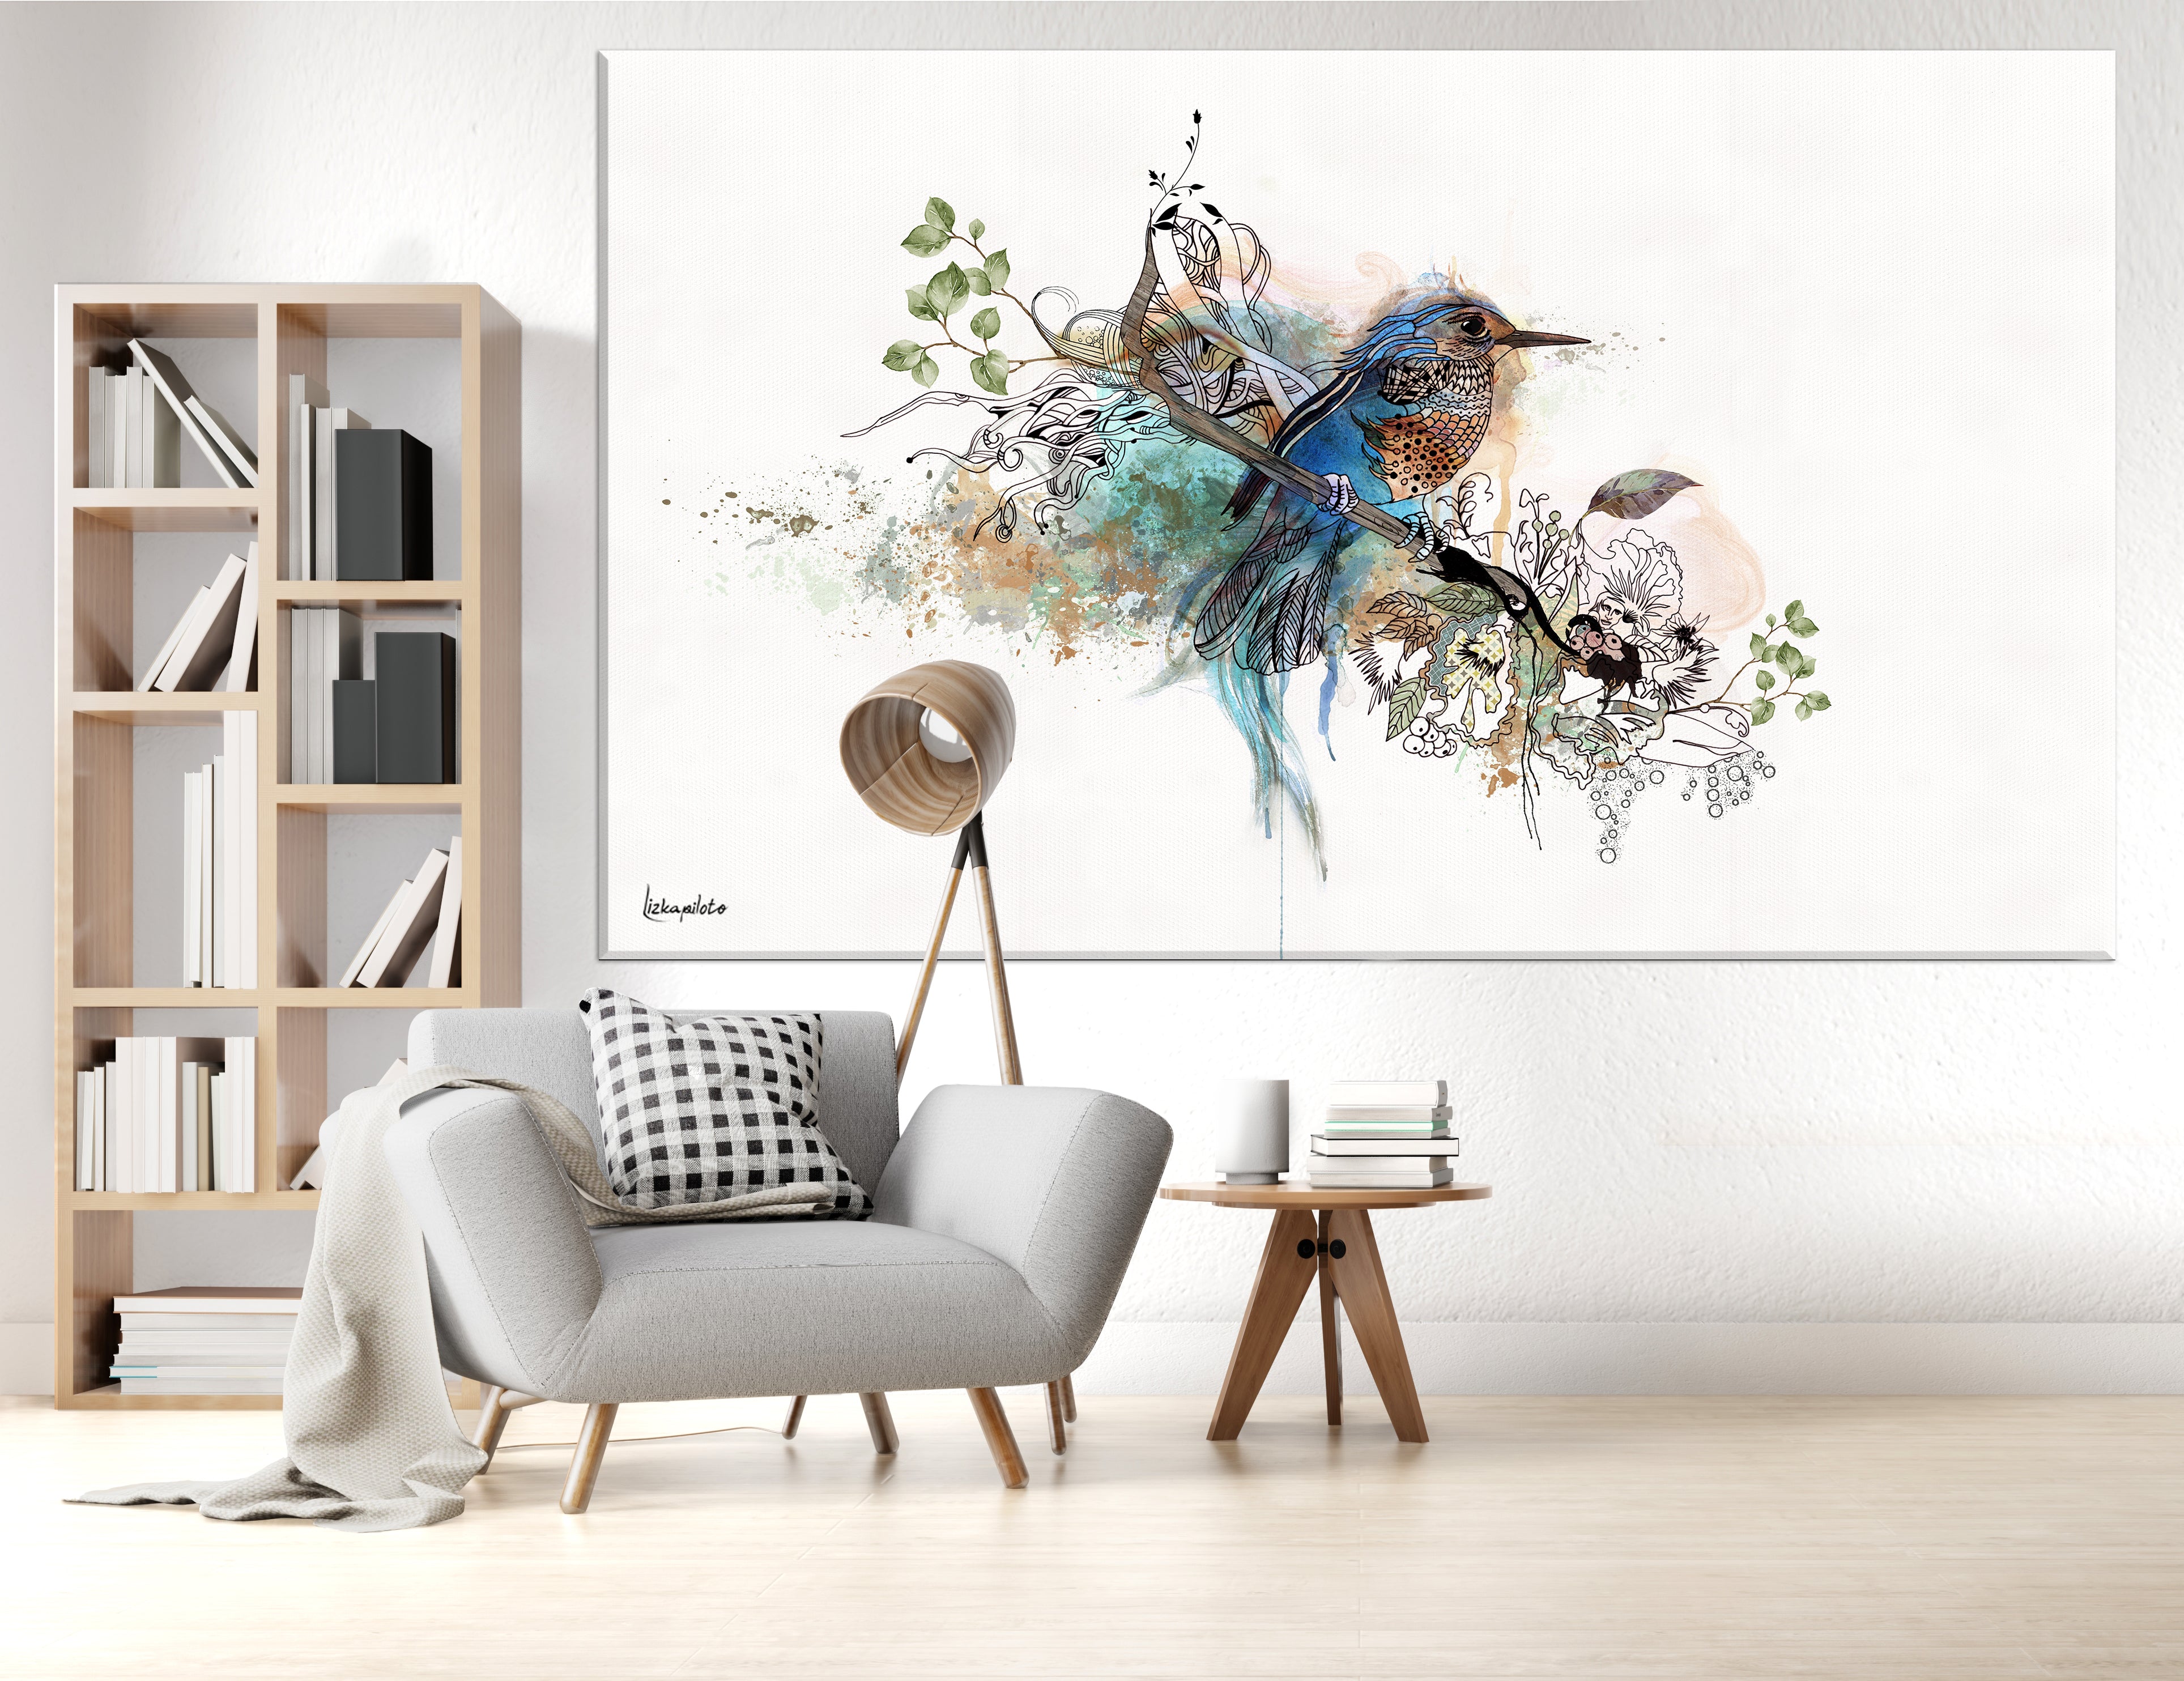 Blue bird painting on canvas, hanged on office wall